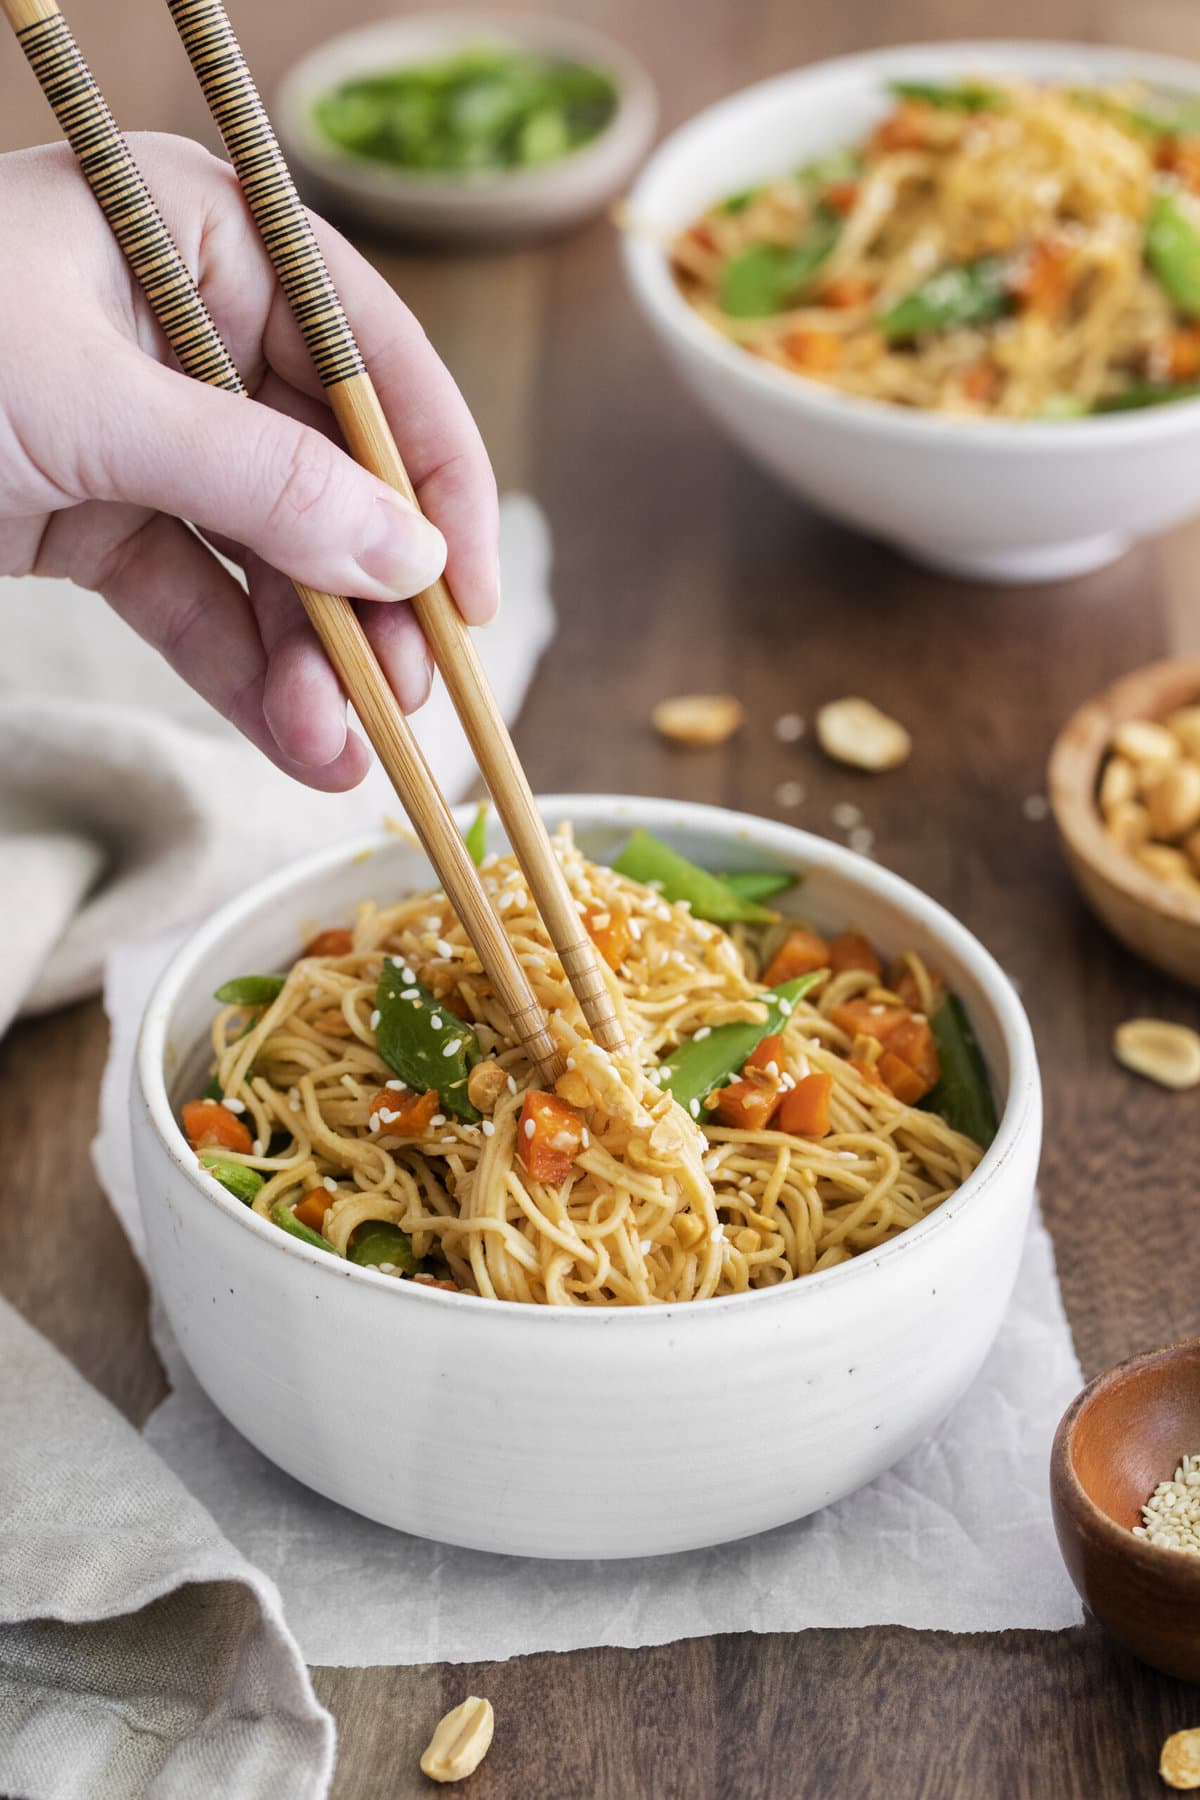 peanut noodles with peas and carrots in a white bowl, someone using chop sticks to take some out.